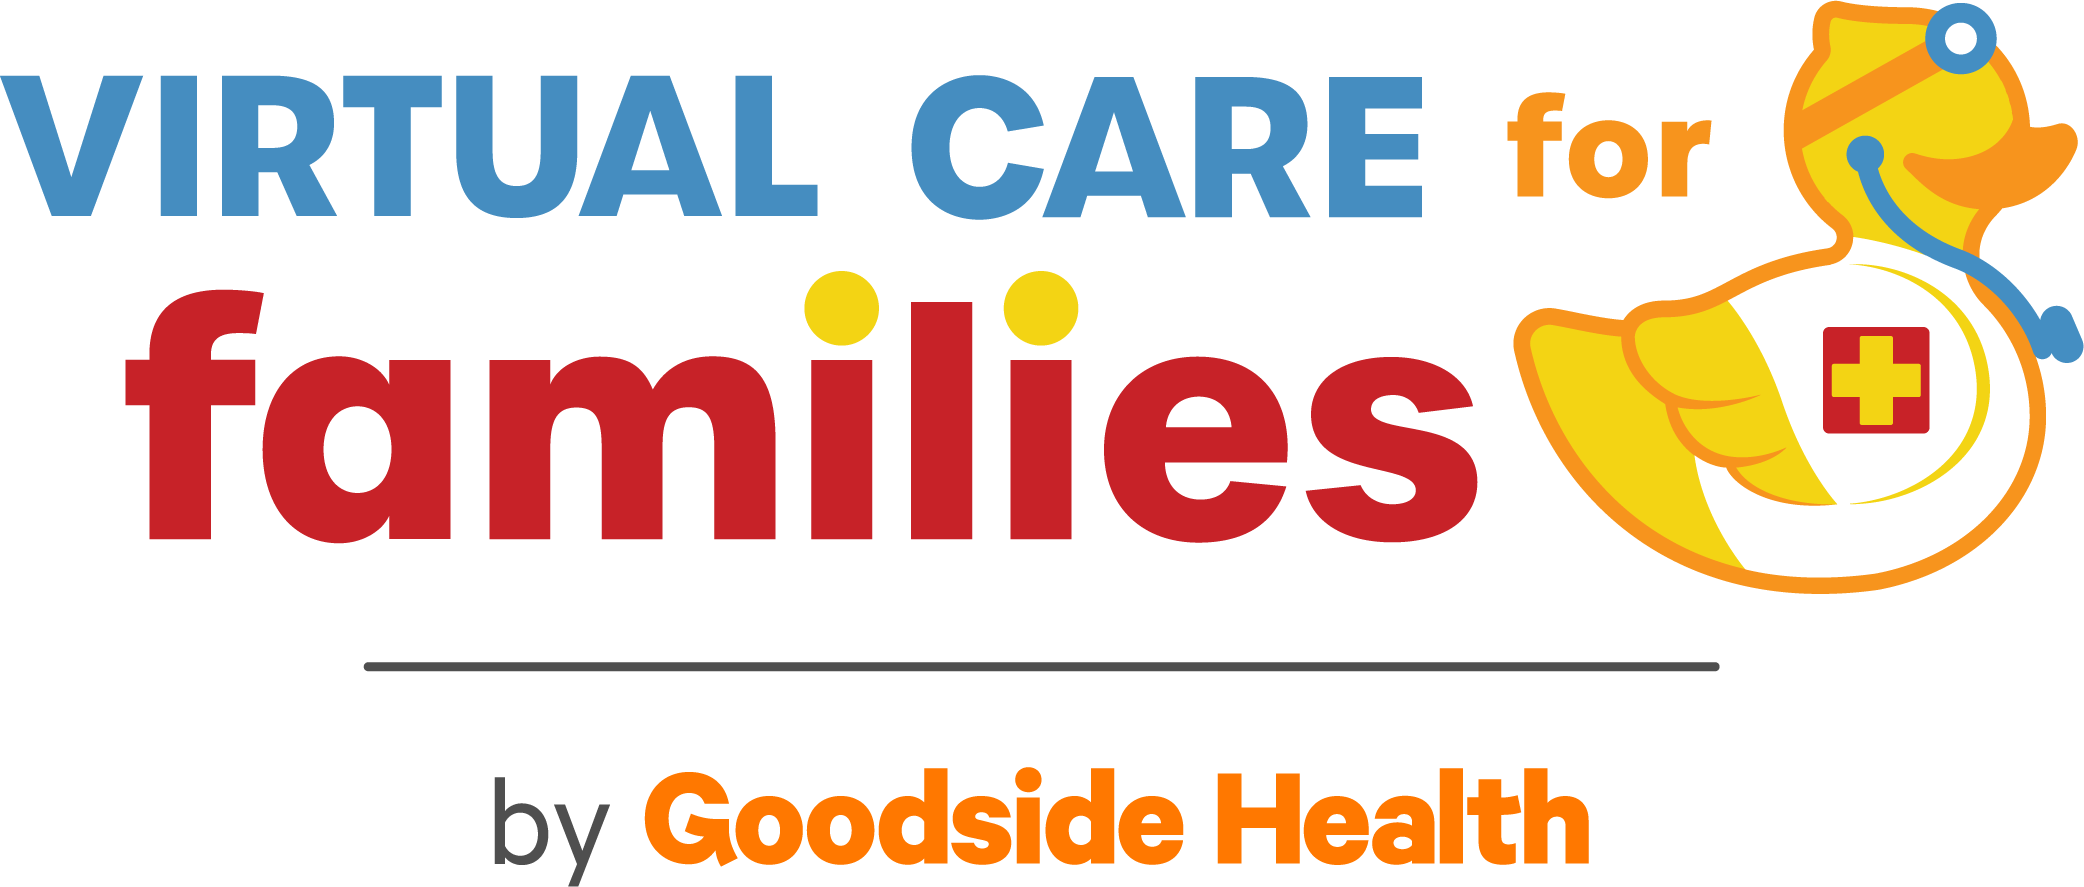 Urgent Care for Kids - Virtual Care for Families Logo